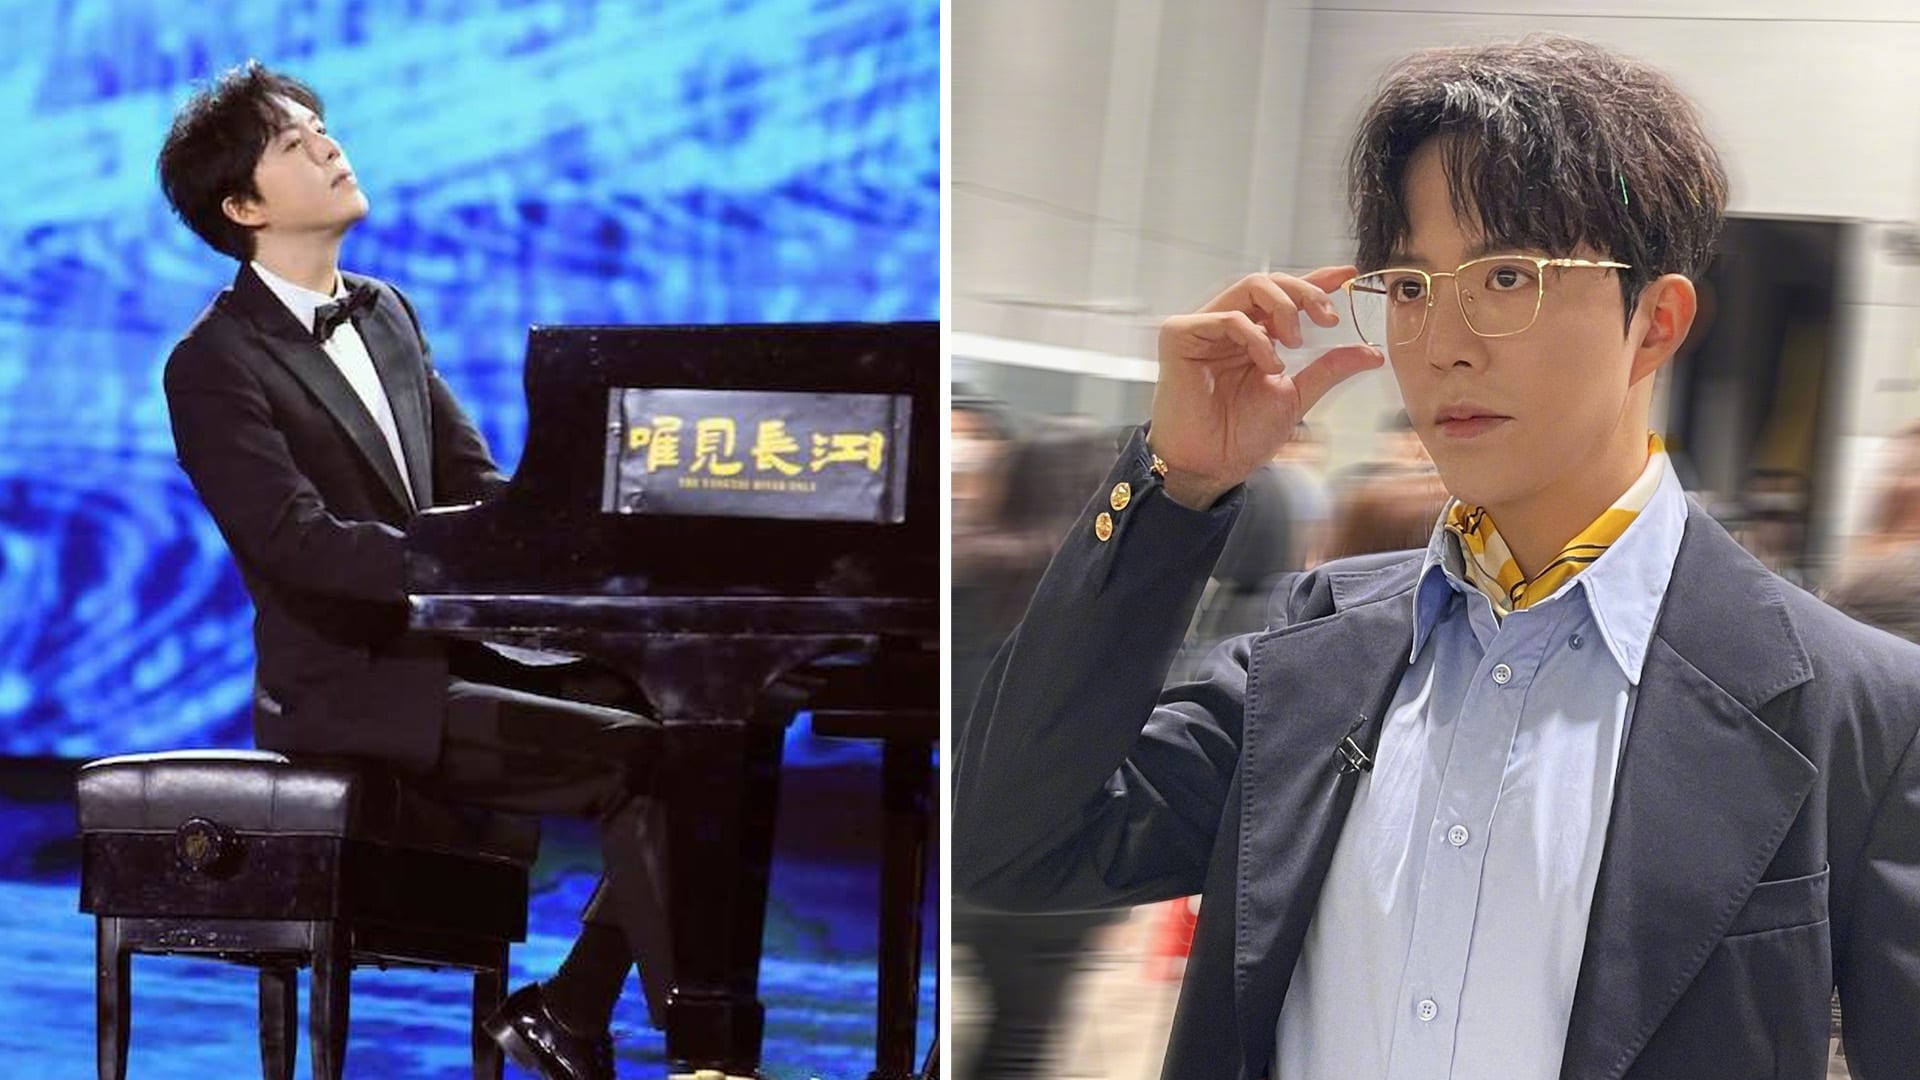 Chinese Pianist Li Yundi Detained On Suspicion Of Soliciting Prostitute